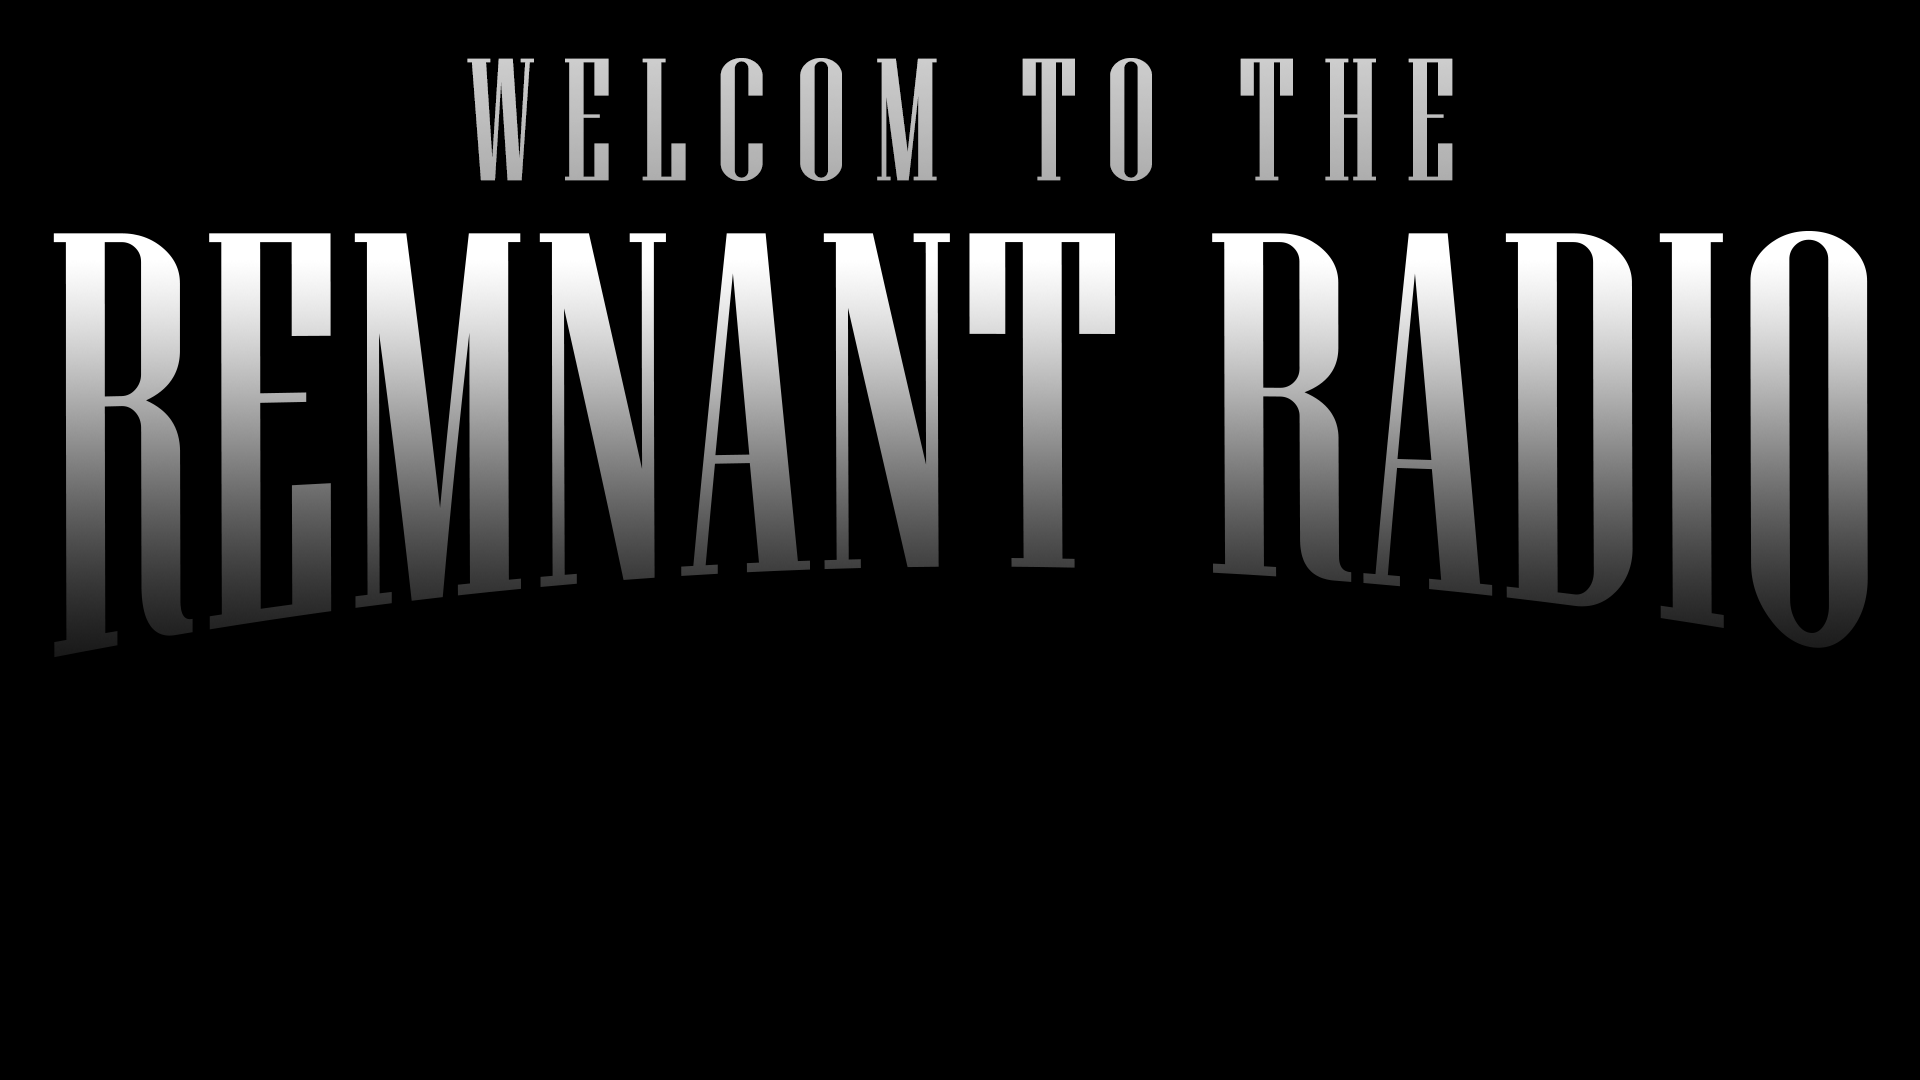 The Remnant Radio Home Background